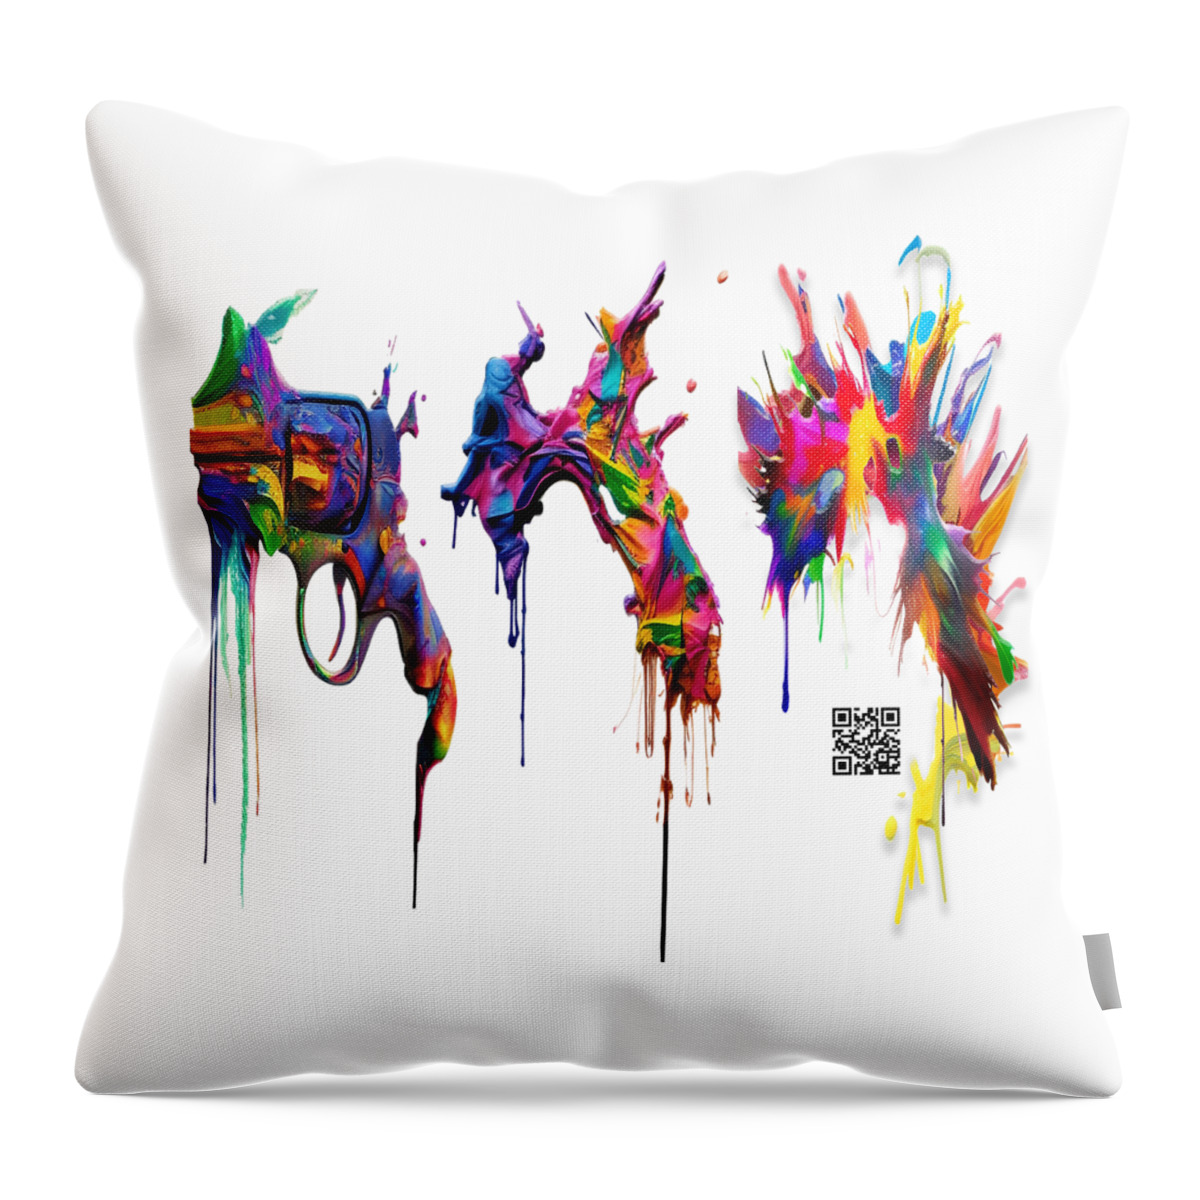 Do It With Art Throw Pillow featuring the digital art Do It With Art Instead by Rafael Salazar